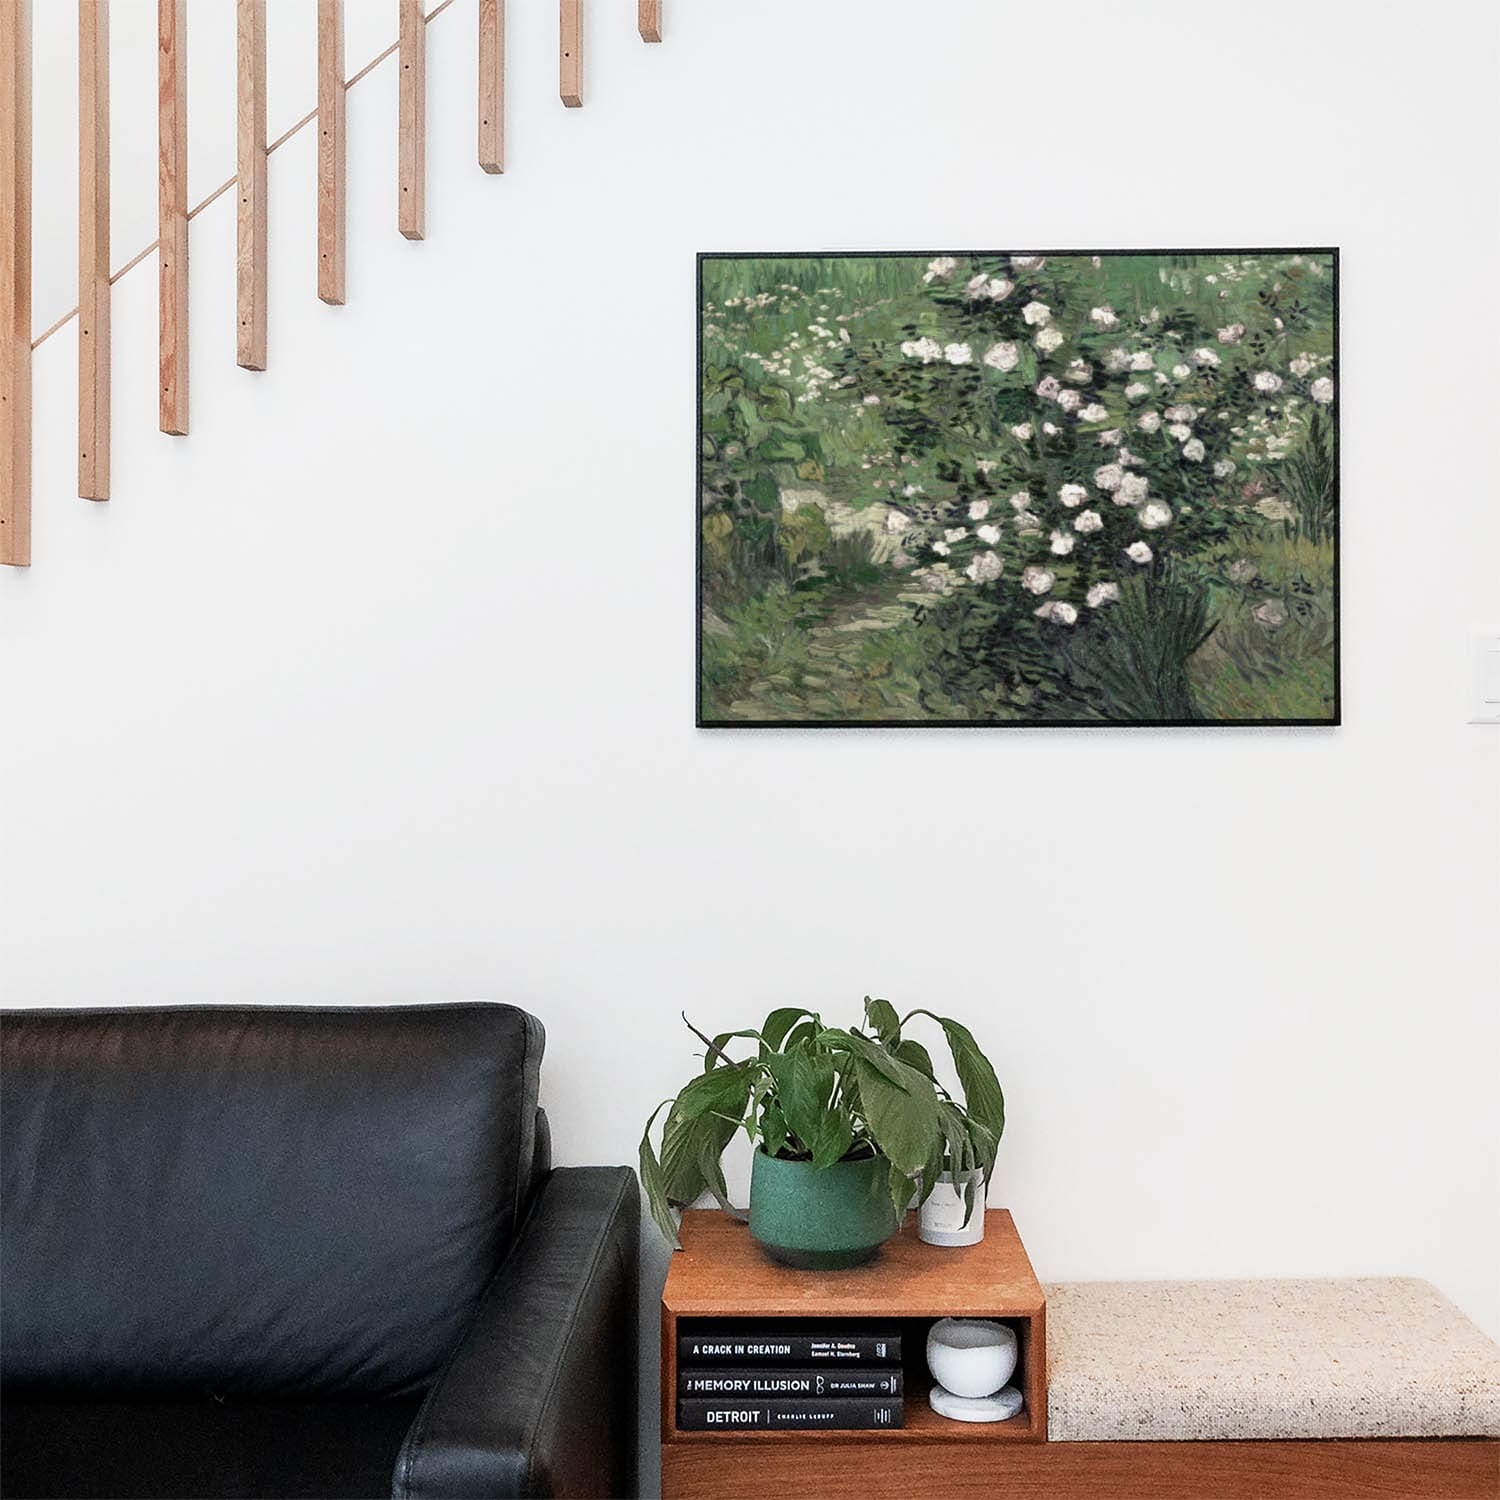 Green with White Flowers Wall Art Print in a Picture Frame on Living Room Wall